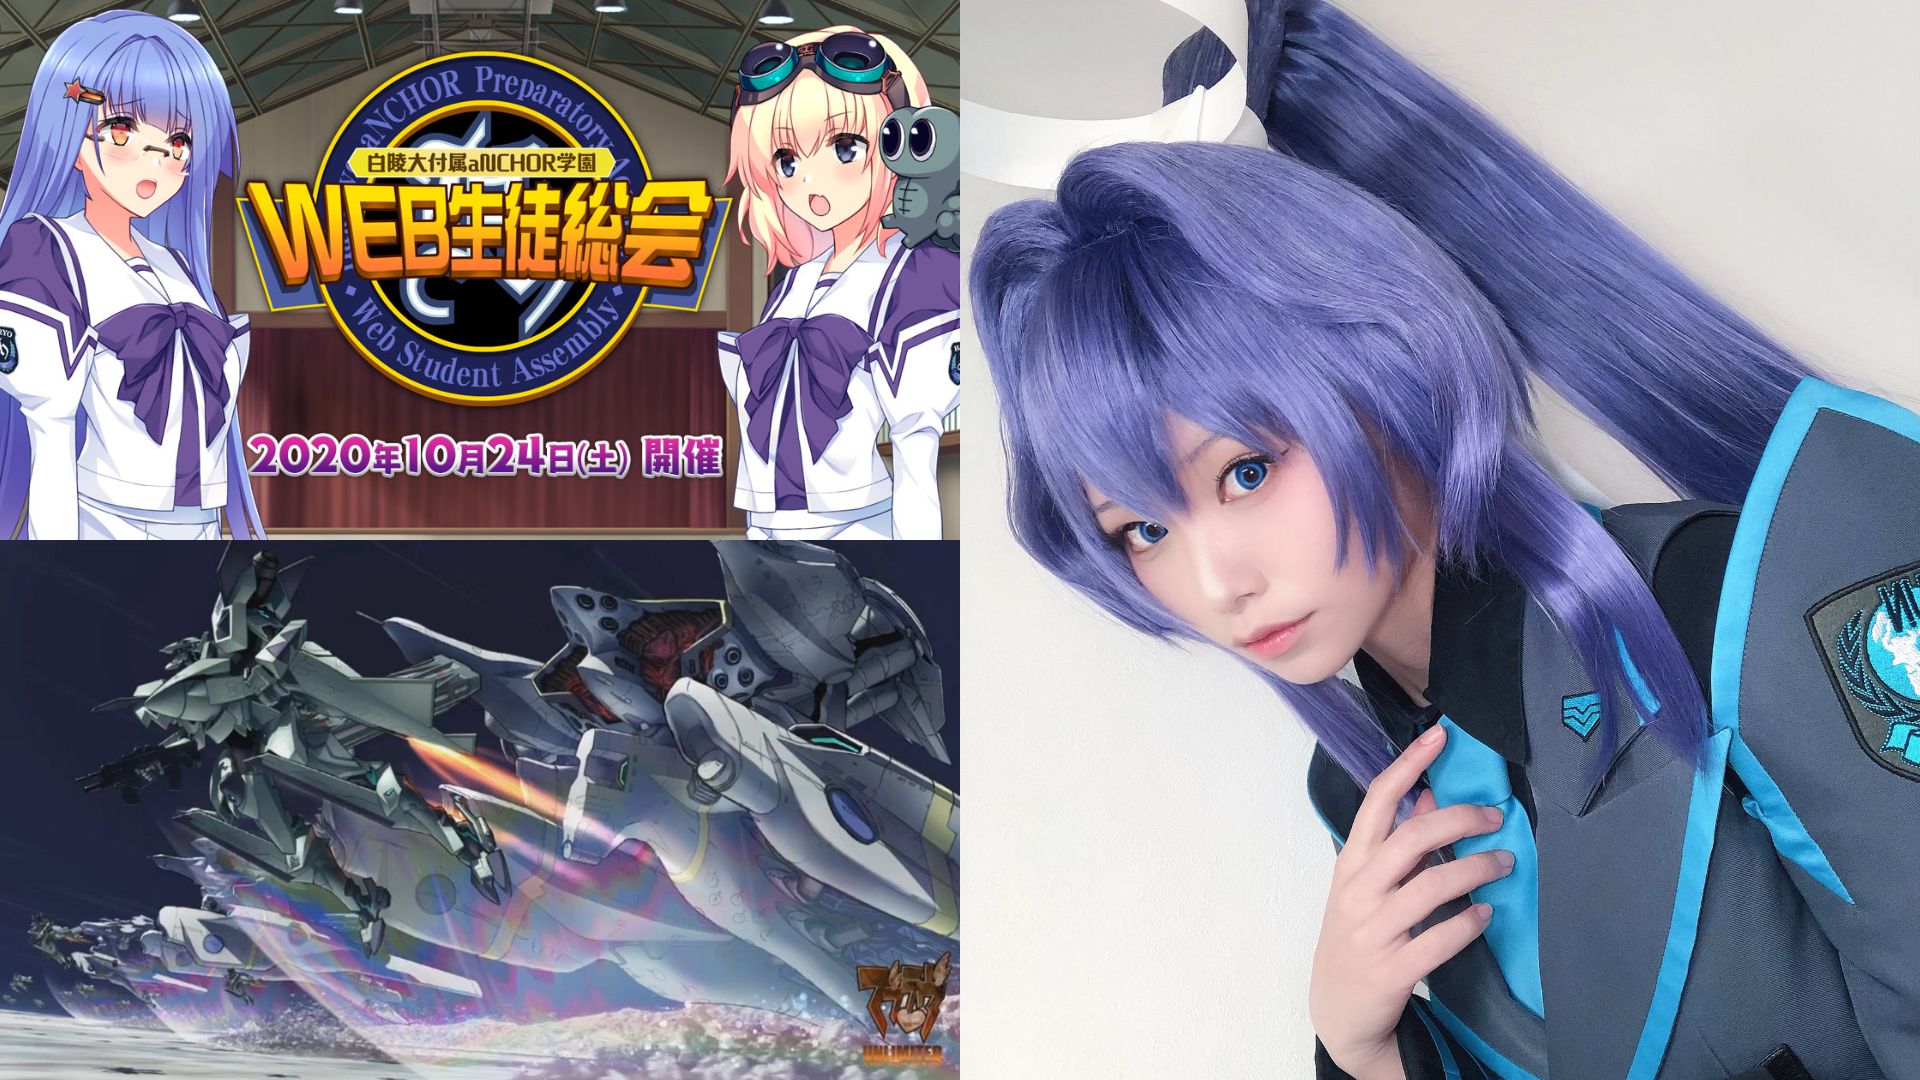 Muv-Luv October 24th event report feature